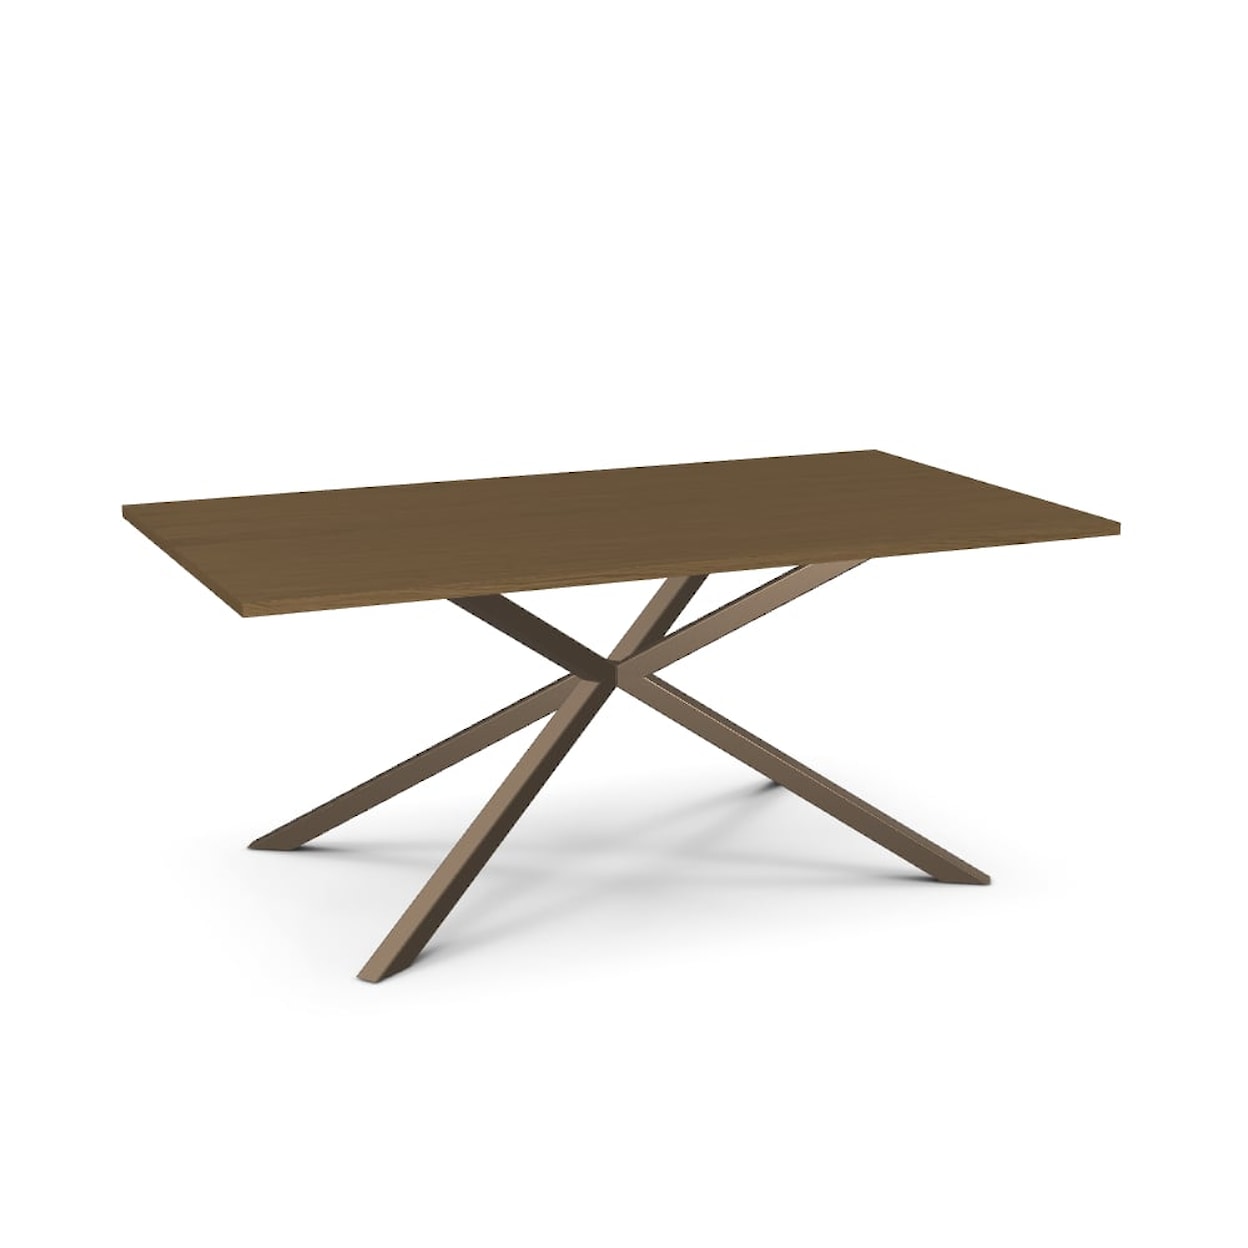 Amisco Asterisk Dining Table with White Oak Veneer Top